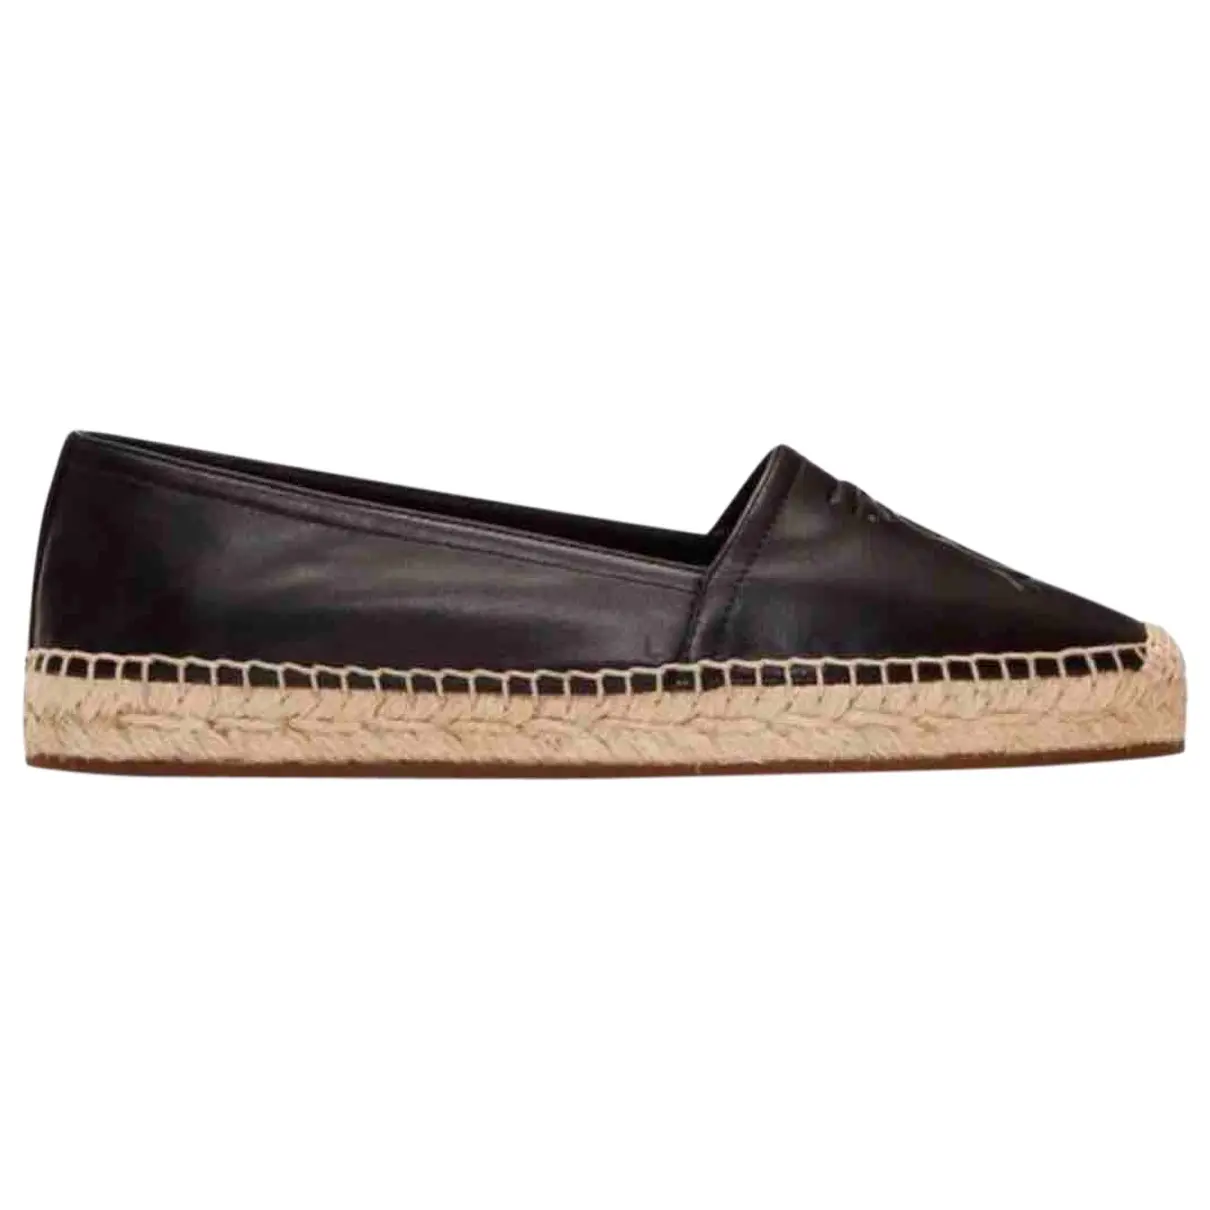 Burberry Leather espadrilles for sale